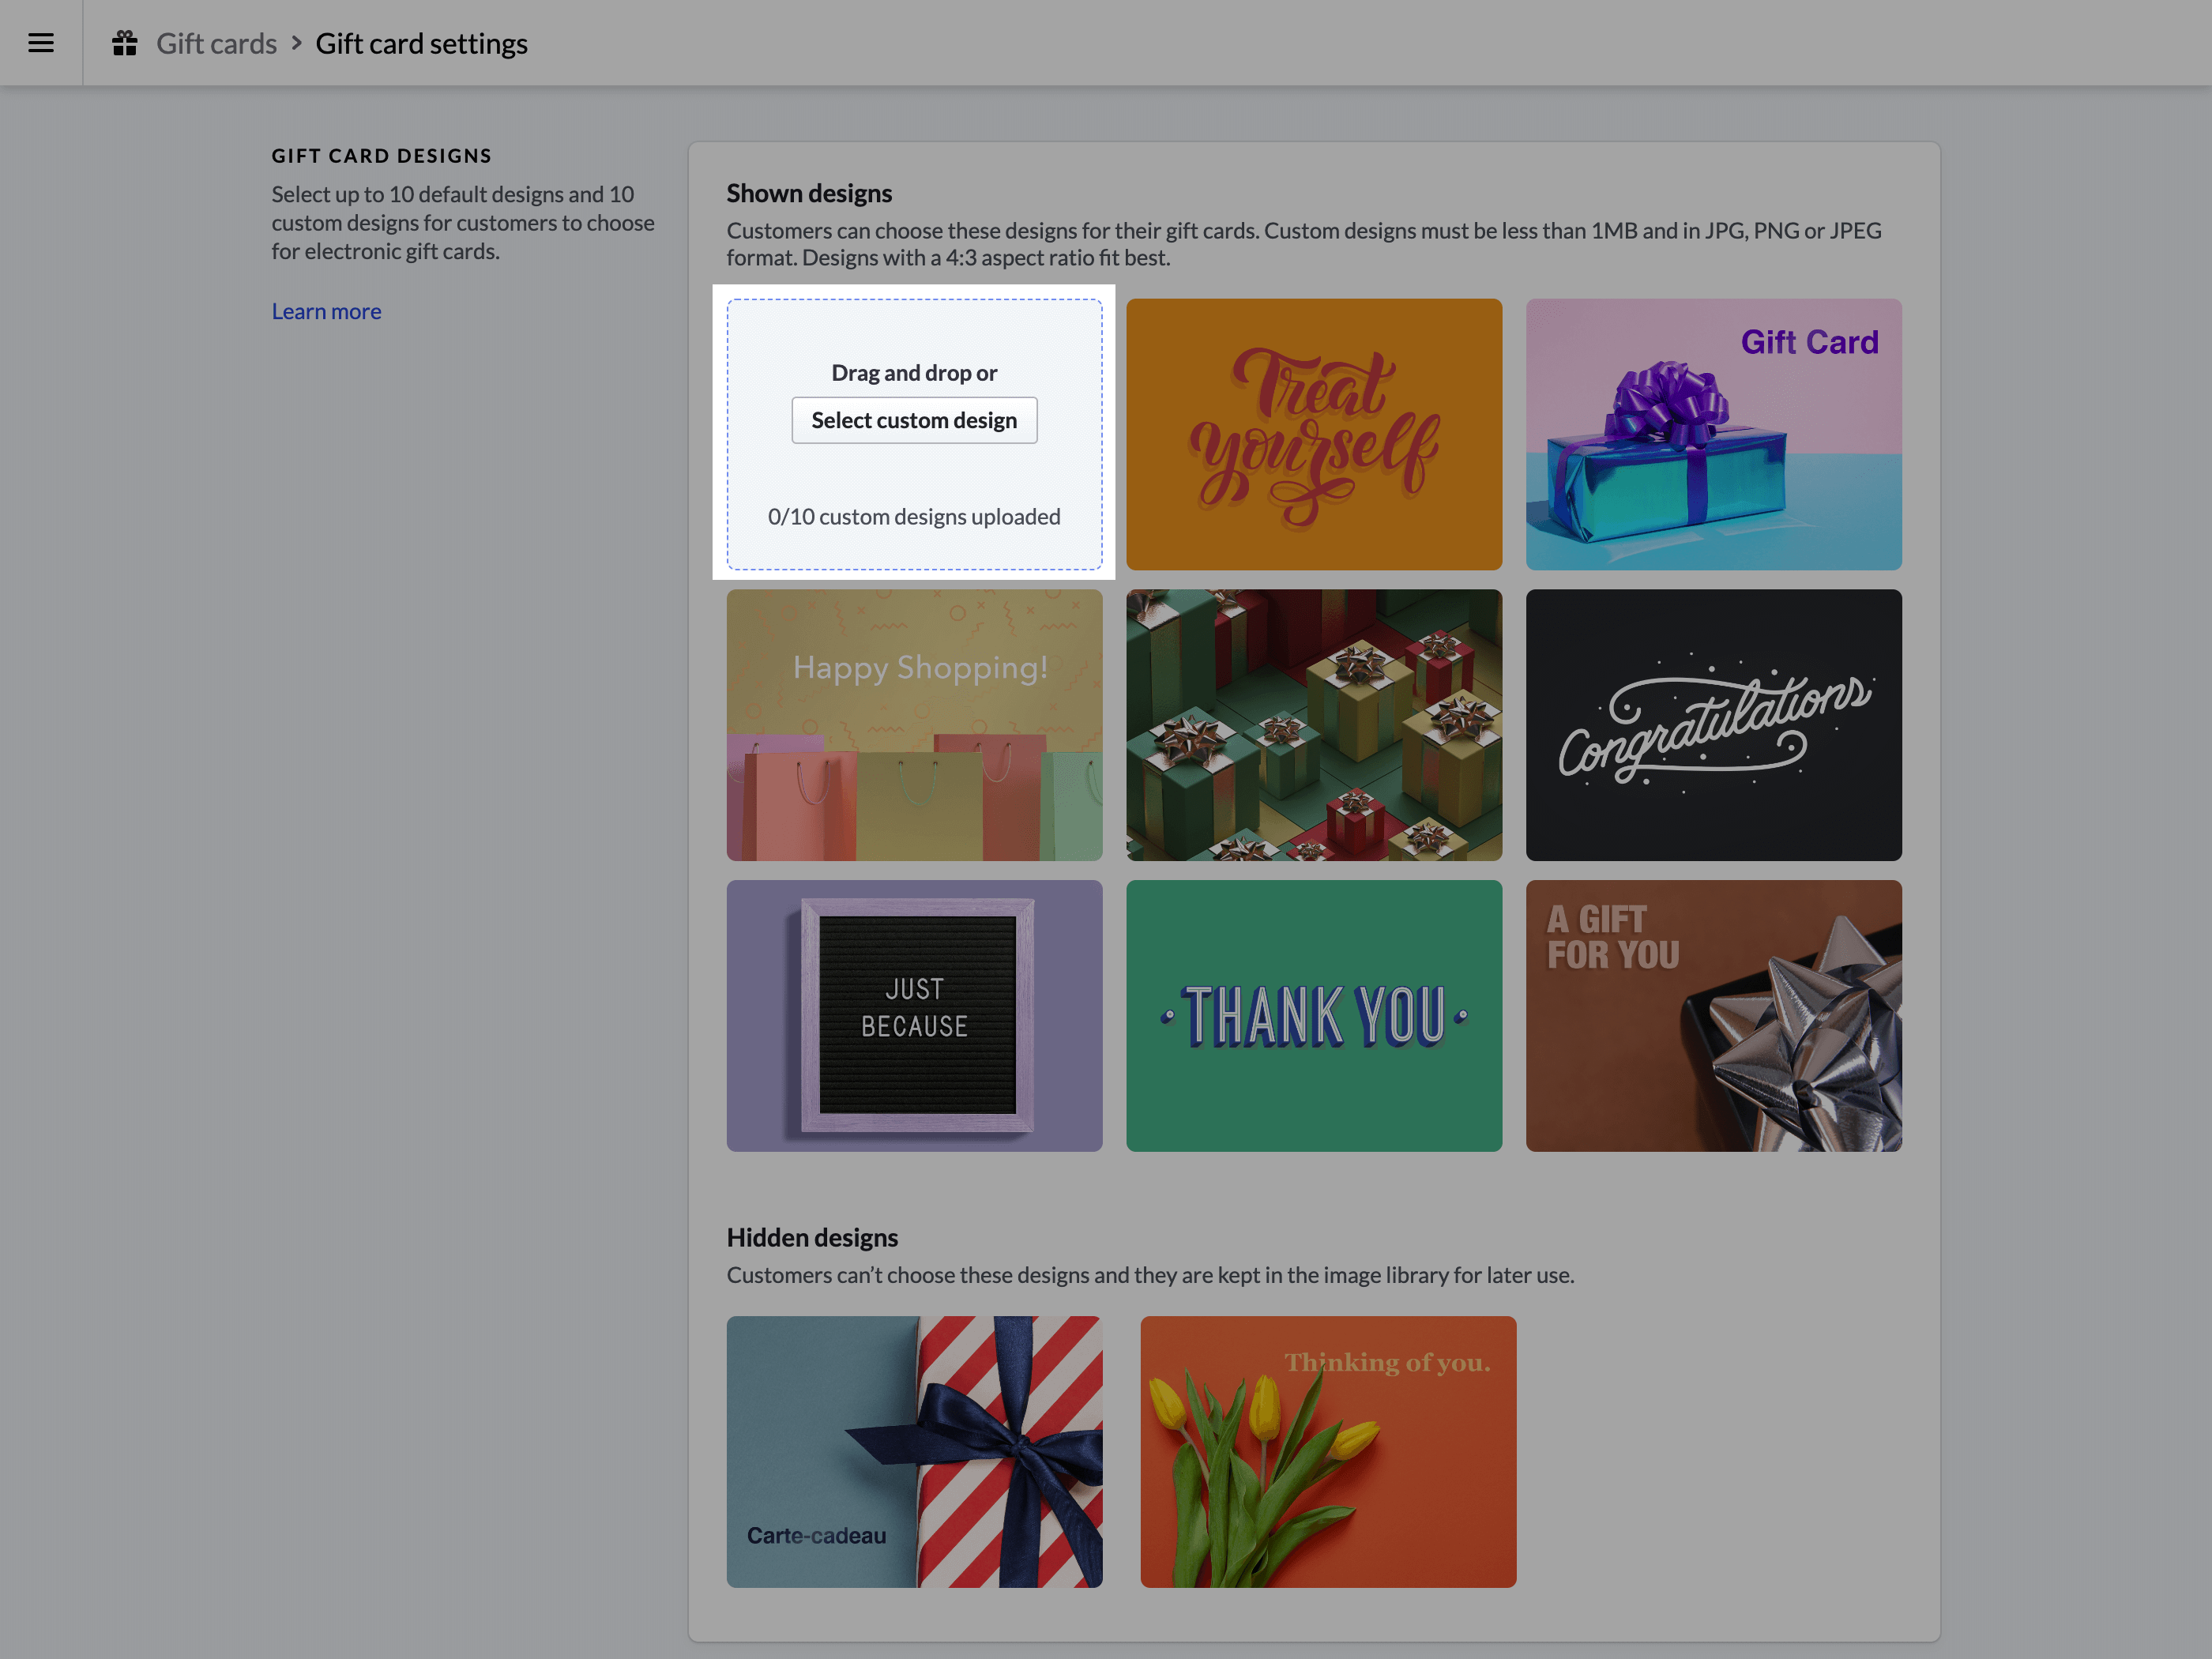 Gift card design section with option to add custom image highlighted.